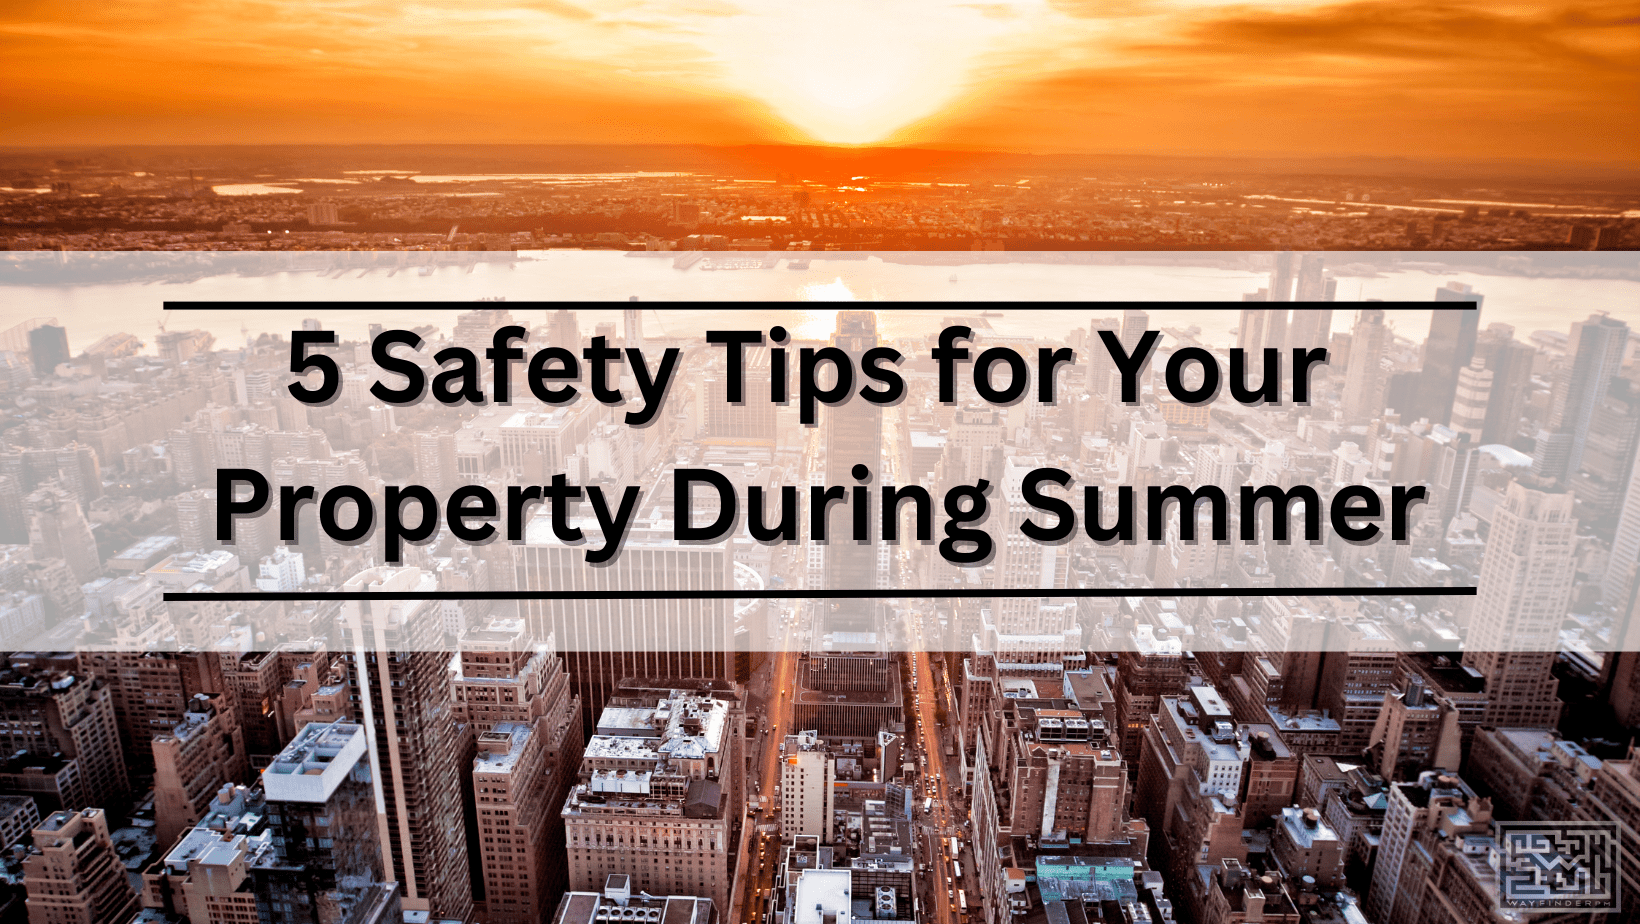 5 Safety Tips for Your Property During Summer